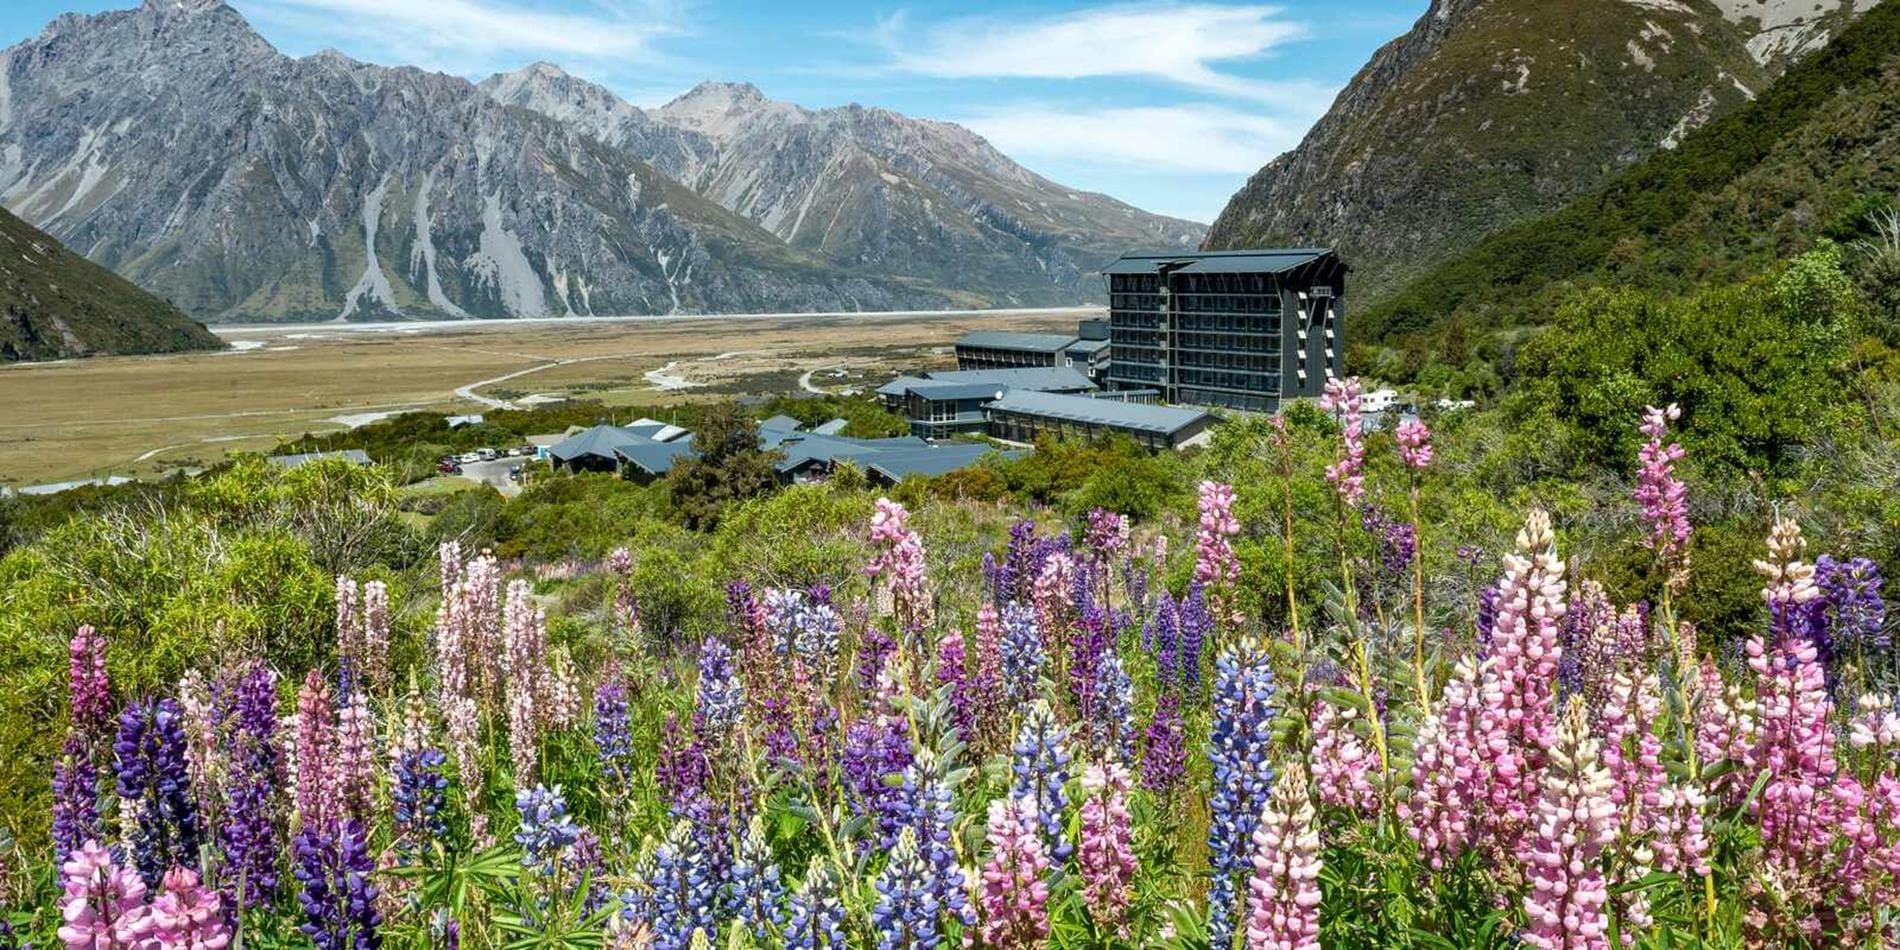 Hermitage Hotel surrounded by mountains and lupins